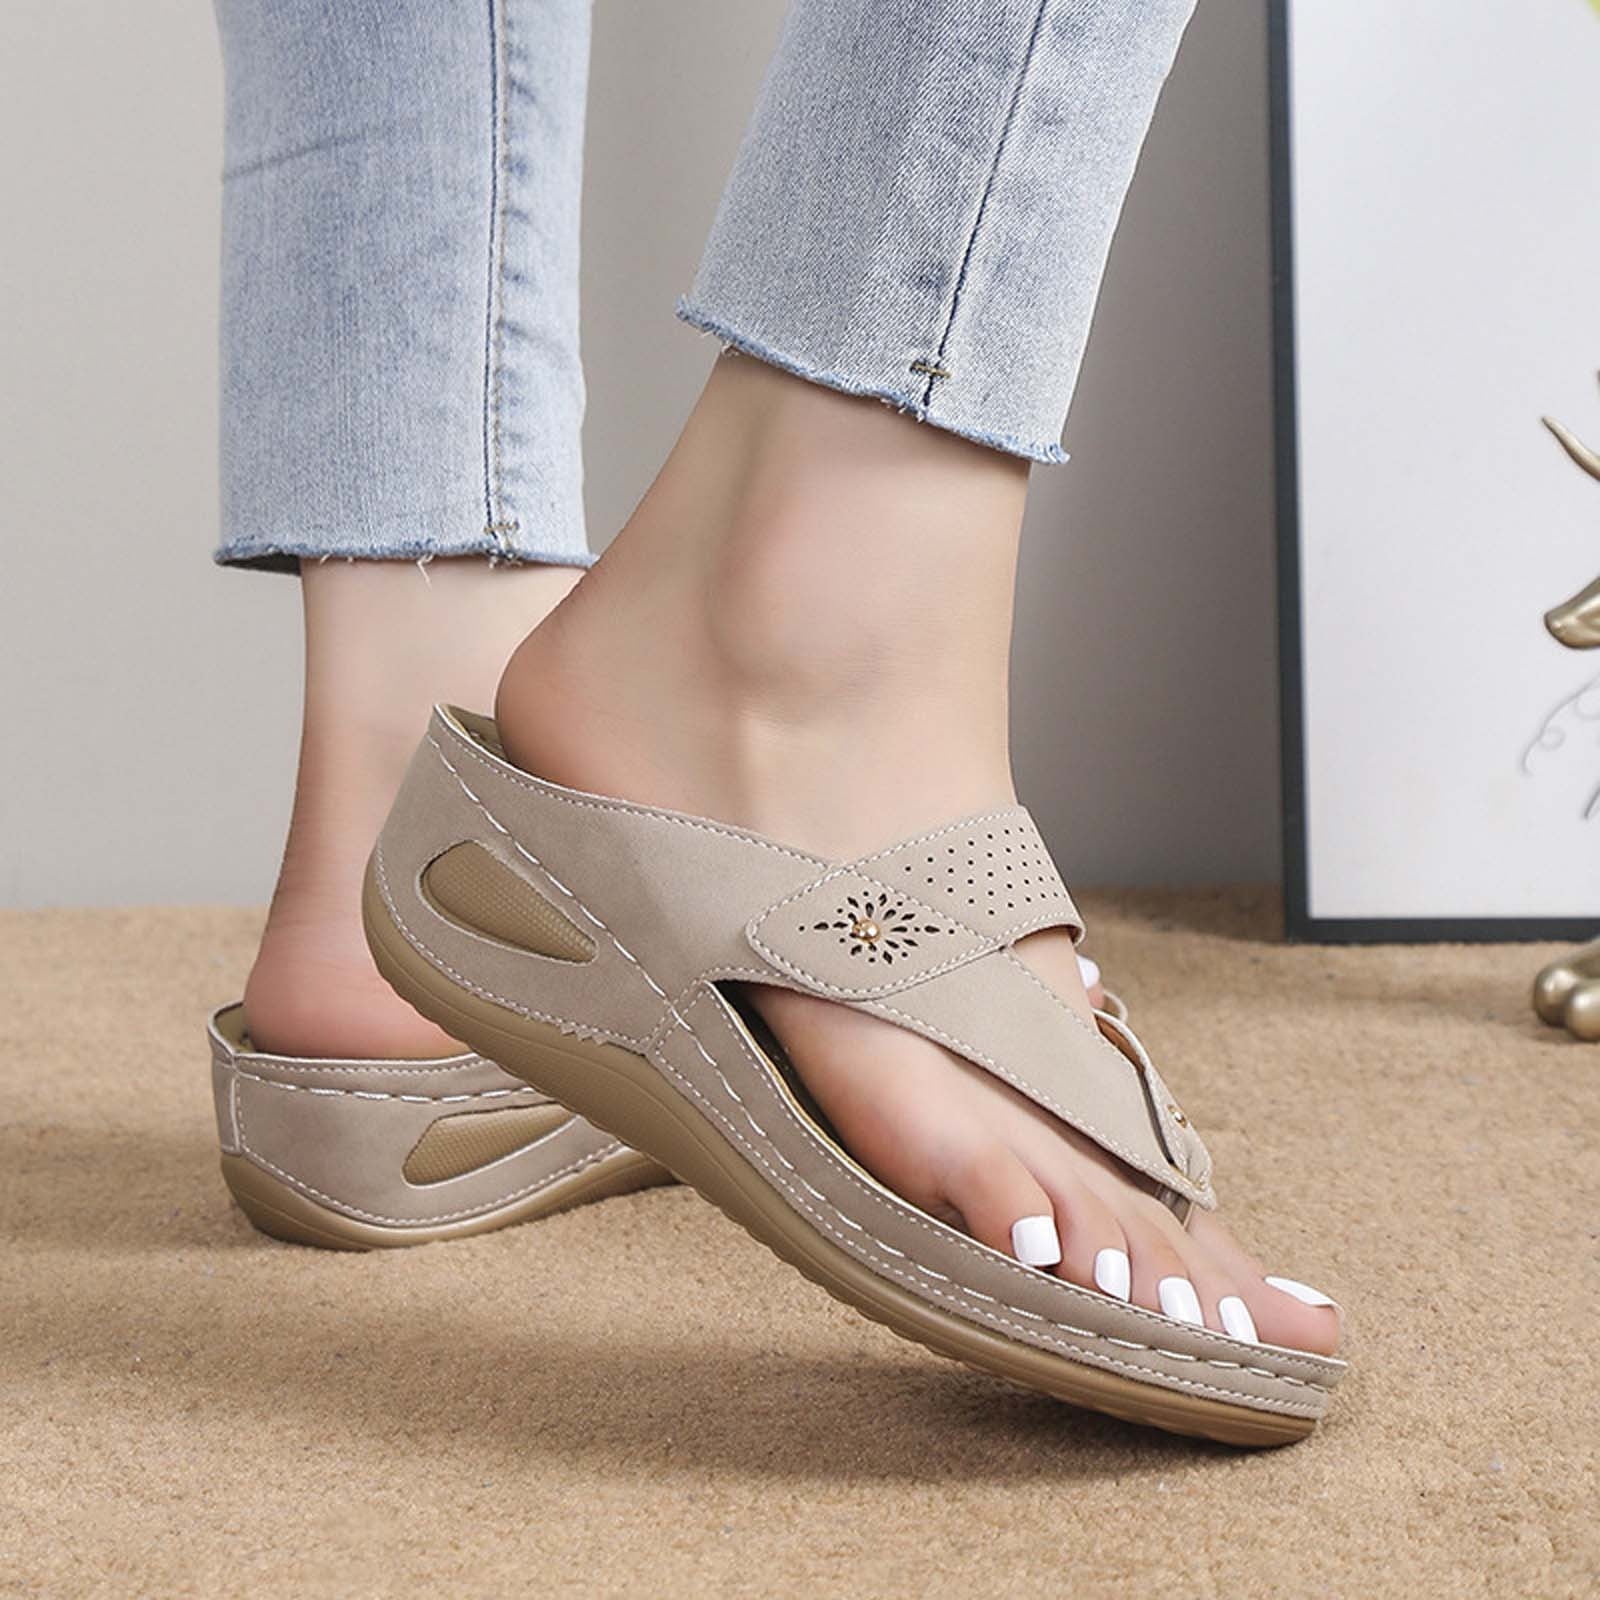 Aueoeo Home Slippers Women, Women's Summer Wedge Sandals Flip Flop With  Arch Support Platform Sandals Comfort Flip Flops Slippers 